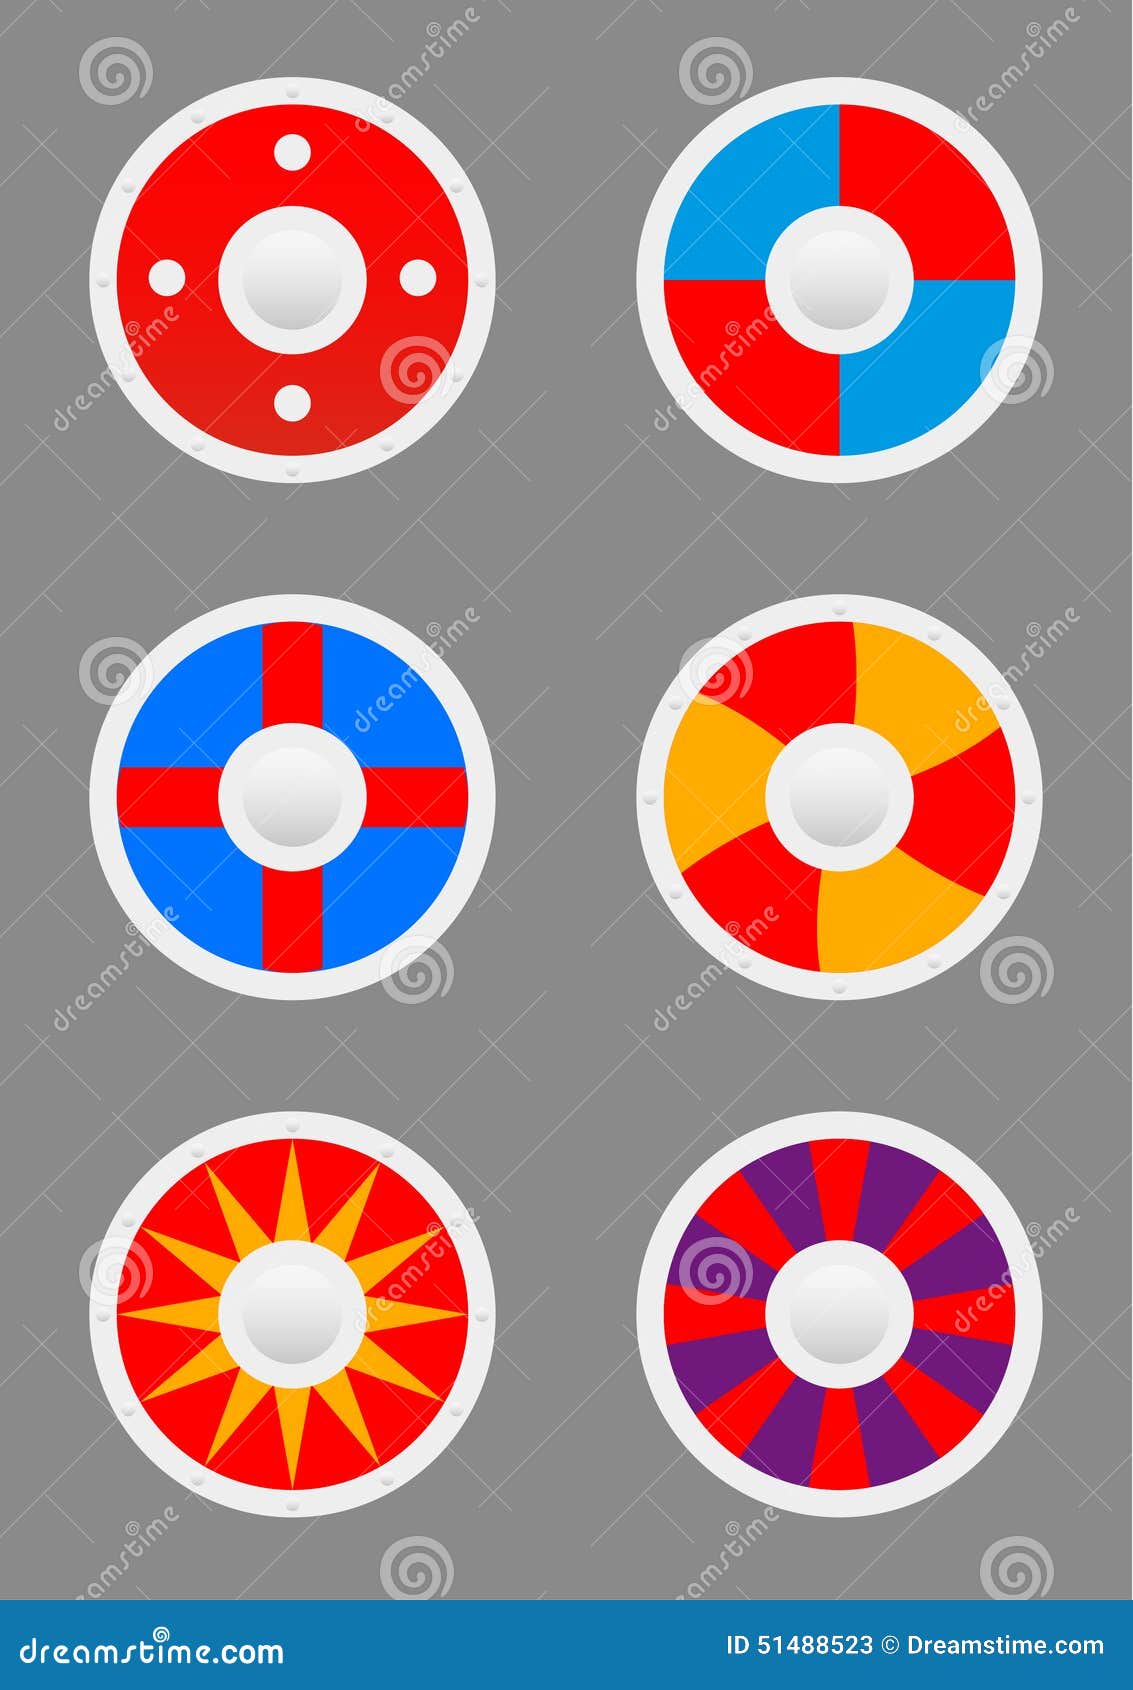 https://thumbs.dreamstime.com/z/round-shields-icons-set-medieval-square-styled-flat-design-symbolize-protection-defense-safety-security-vector-graphics-51488523.jpg